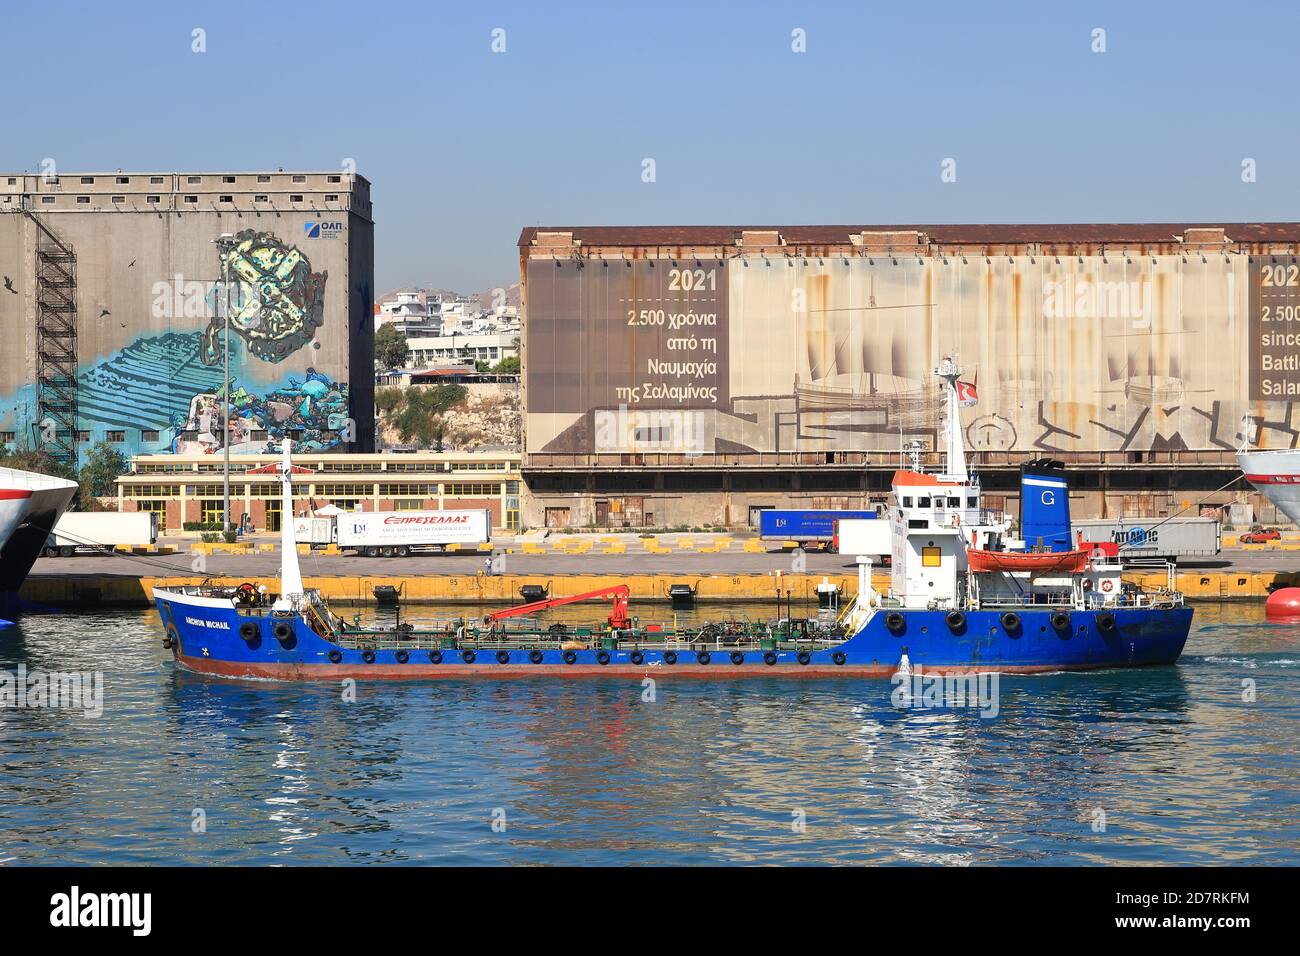 Archon Michail, an oil products tanker, departs the port of Piraeus, Greece.  The vessel was built in 1985 and sails under the Greek flag. Stock Photo